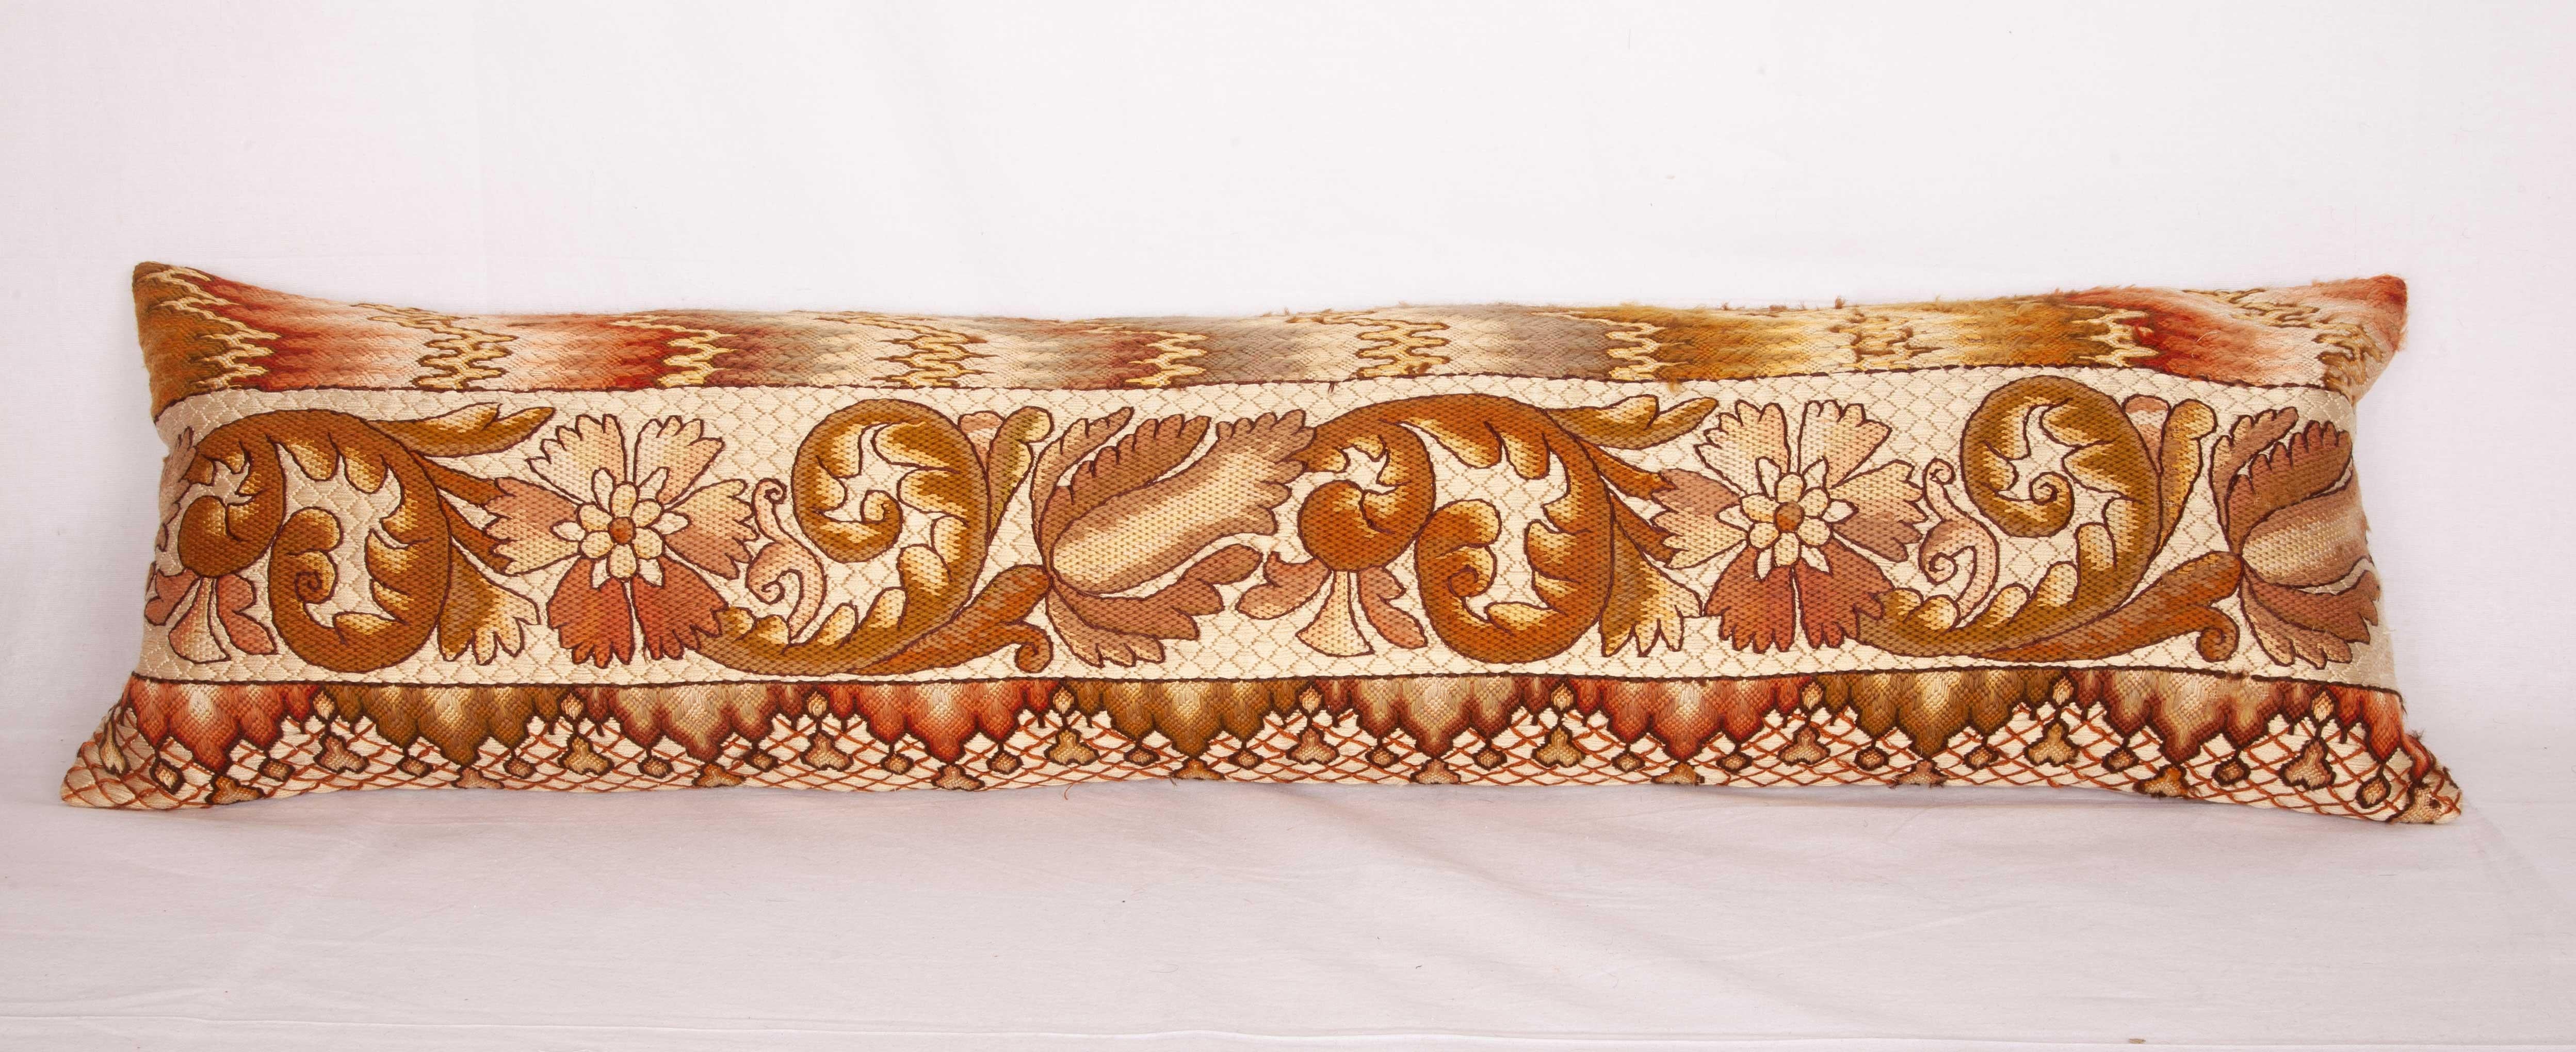 Italian Lumbar Pillow Cases Fashioned from a European Flame Stitch Textile, 19th Century For Sale